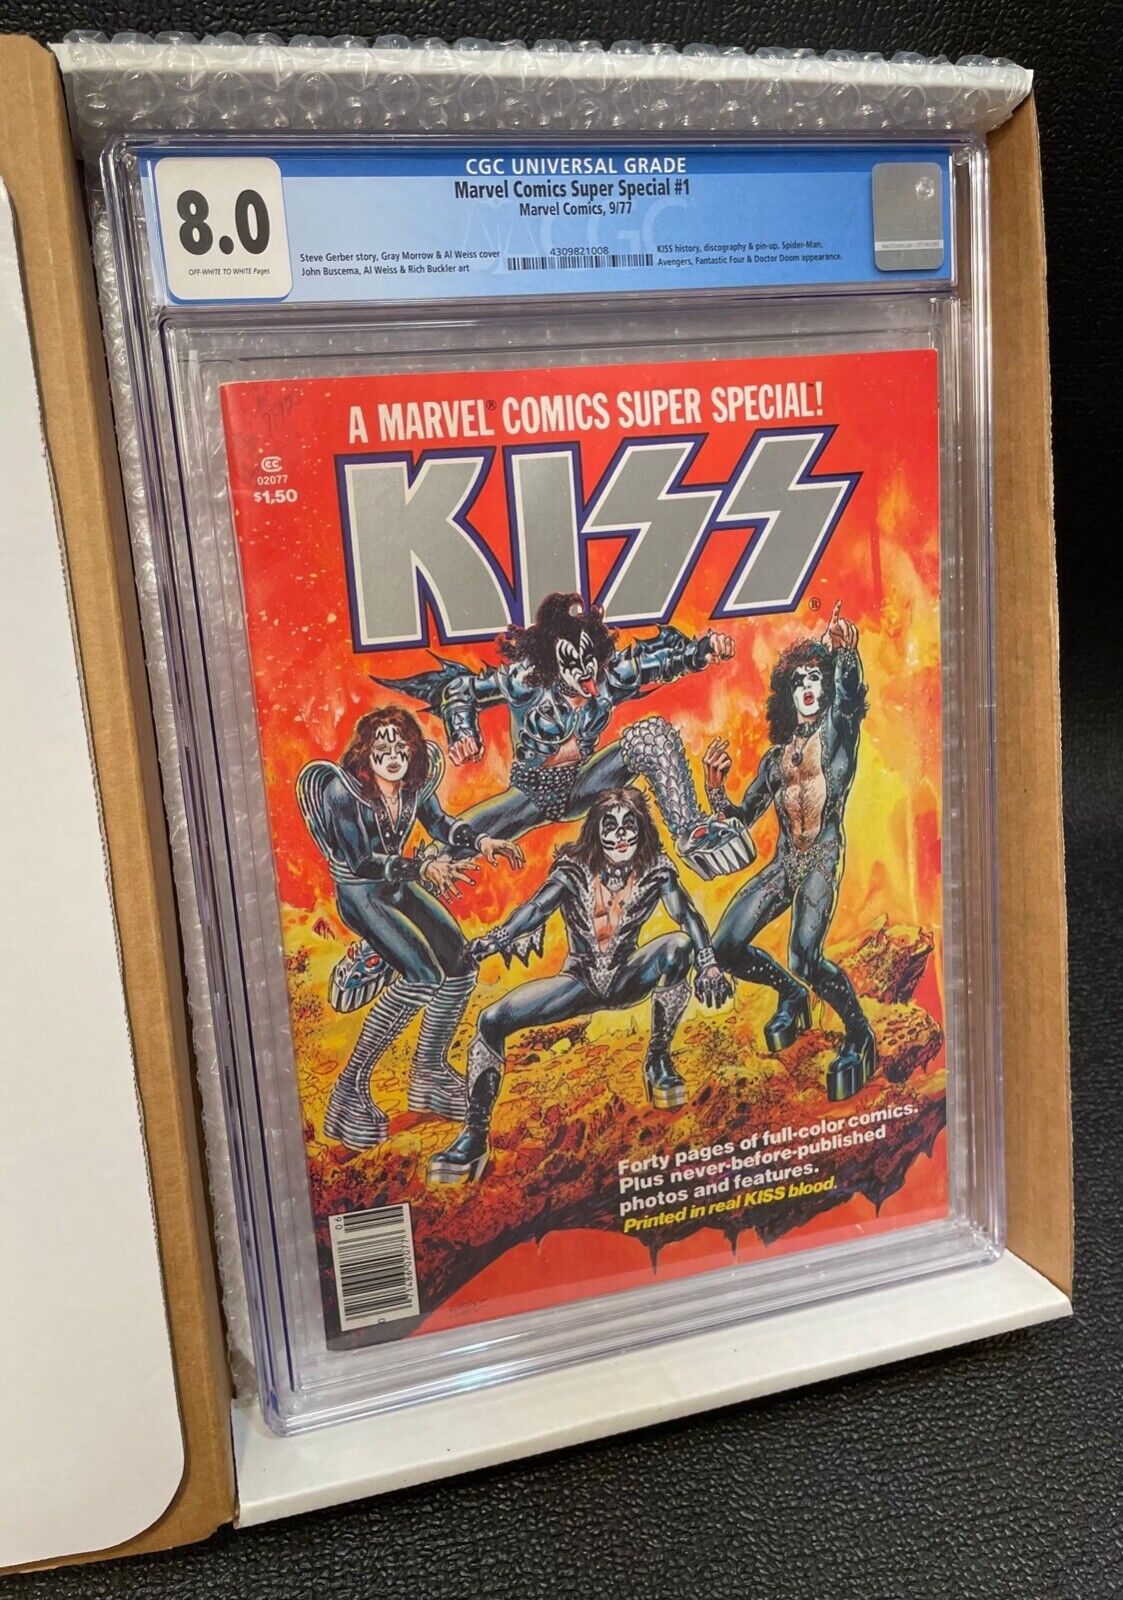 Marvel Comics Super Special #1, KISS (1977) CGC 8.0 (The Famous Blood Ink Issue)